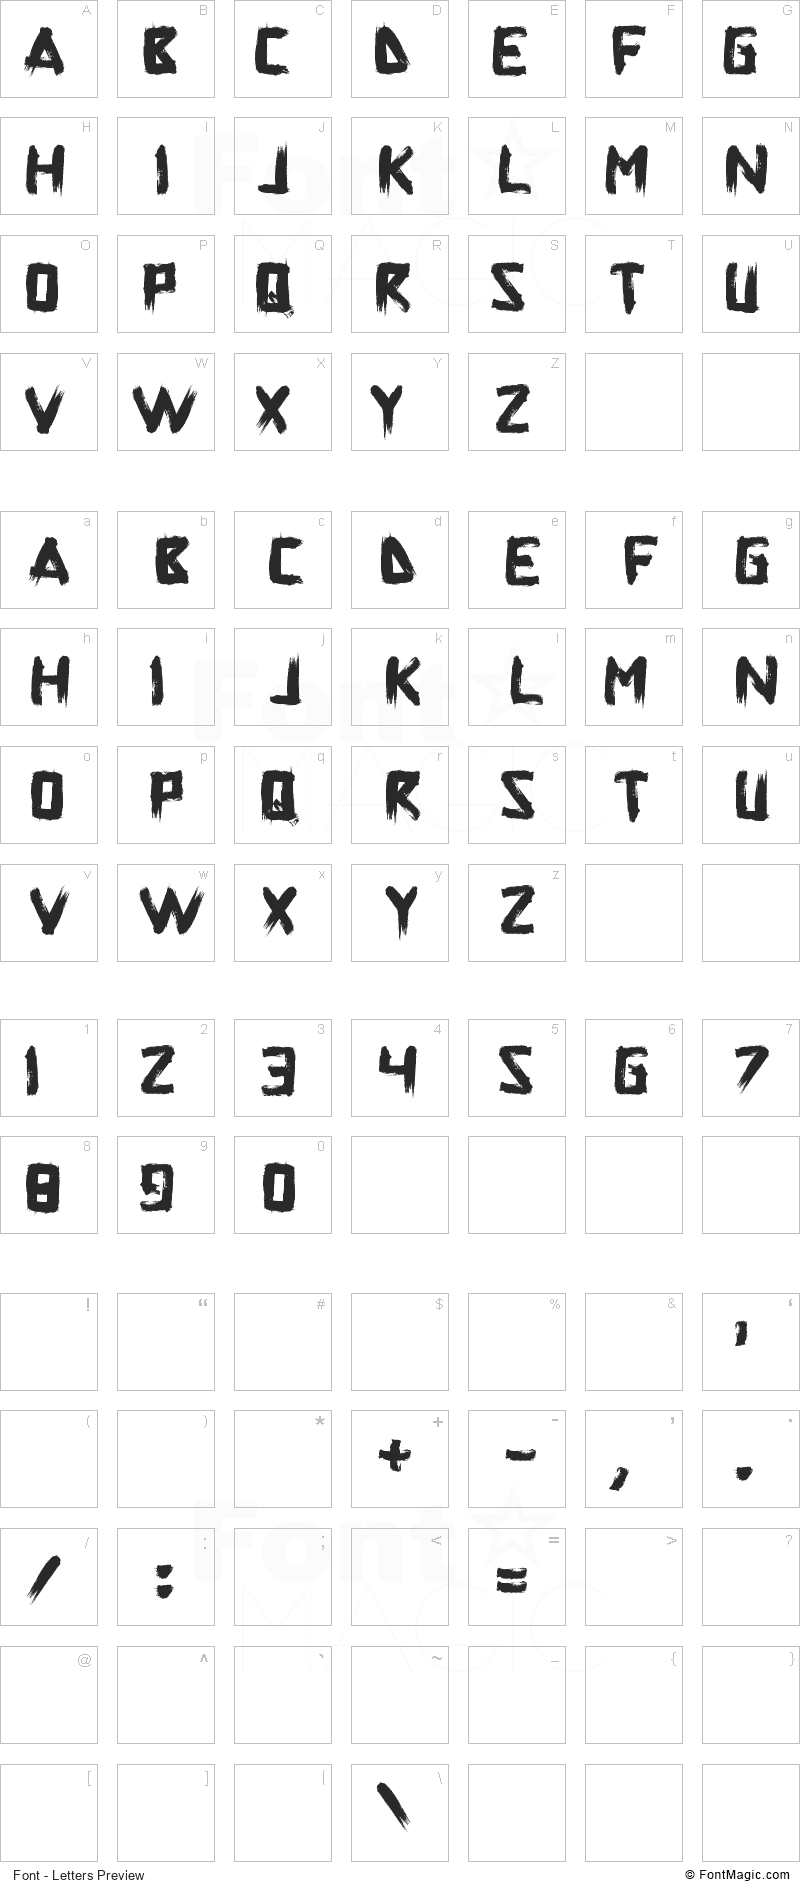 Superpower Synonym Font - All Latters Preview Chart